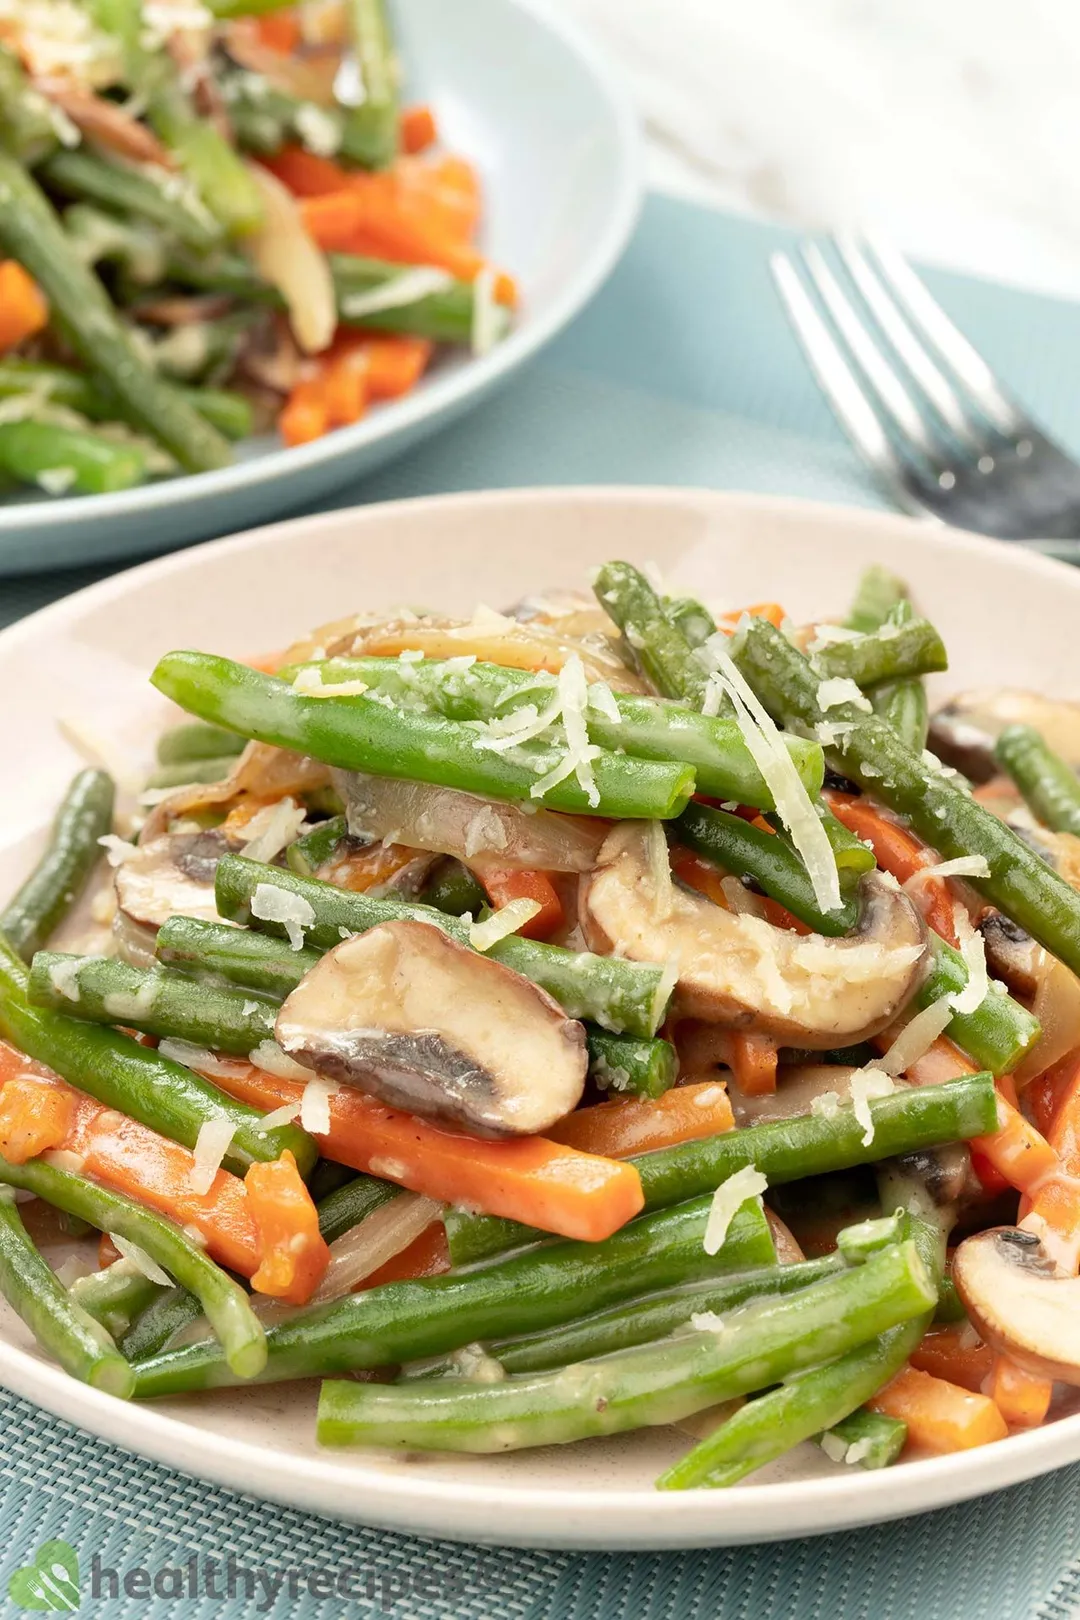 Two plates of sauteed green beans, carrots, and mushrooms.